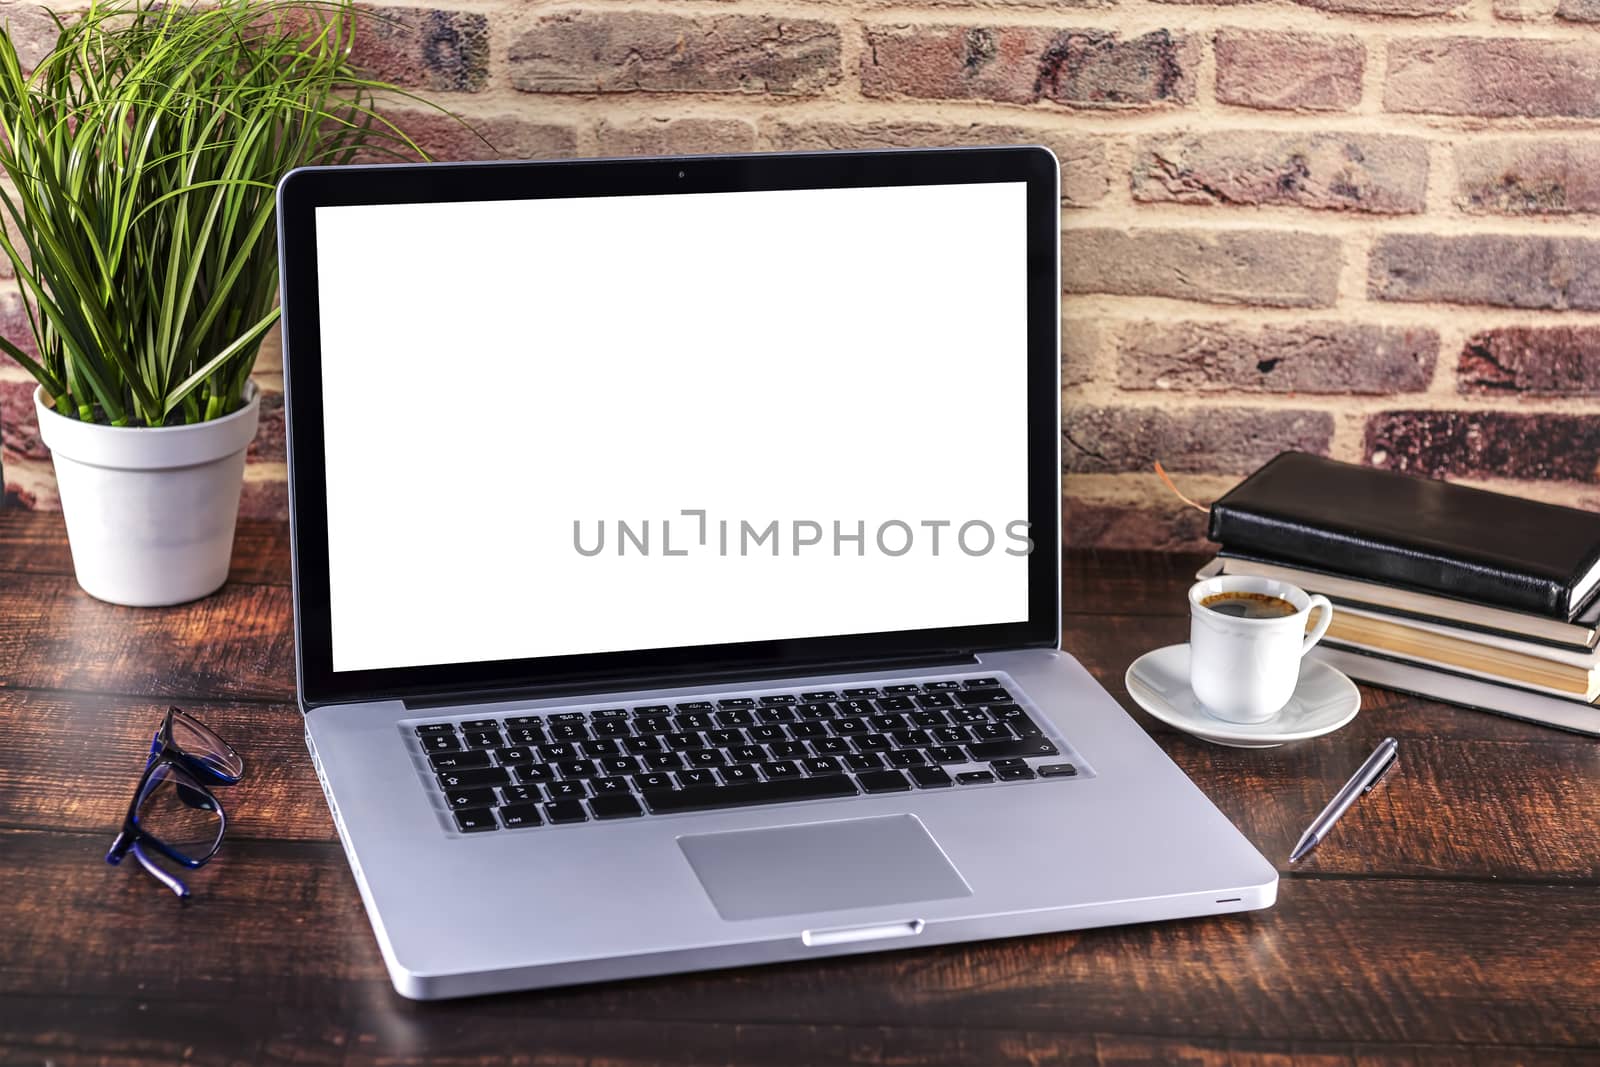 Laptop notebook with blank screen and cup of coffee and notepad pen and books on wooden table. 
Mock up on wooden table with laptop with blank screen, cup of coffee, pen, books and flower.
Focus on keyboard.